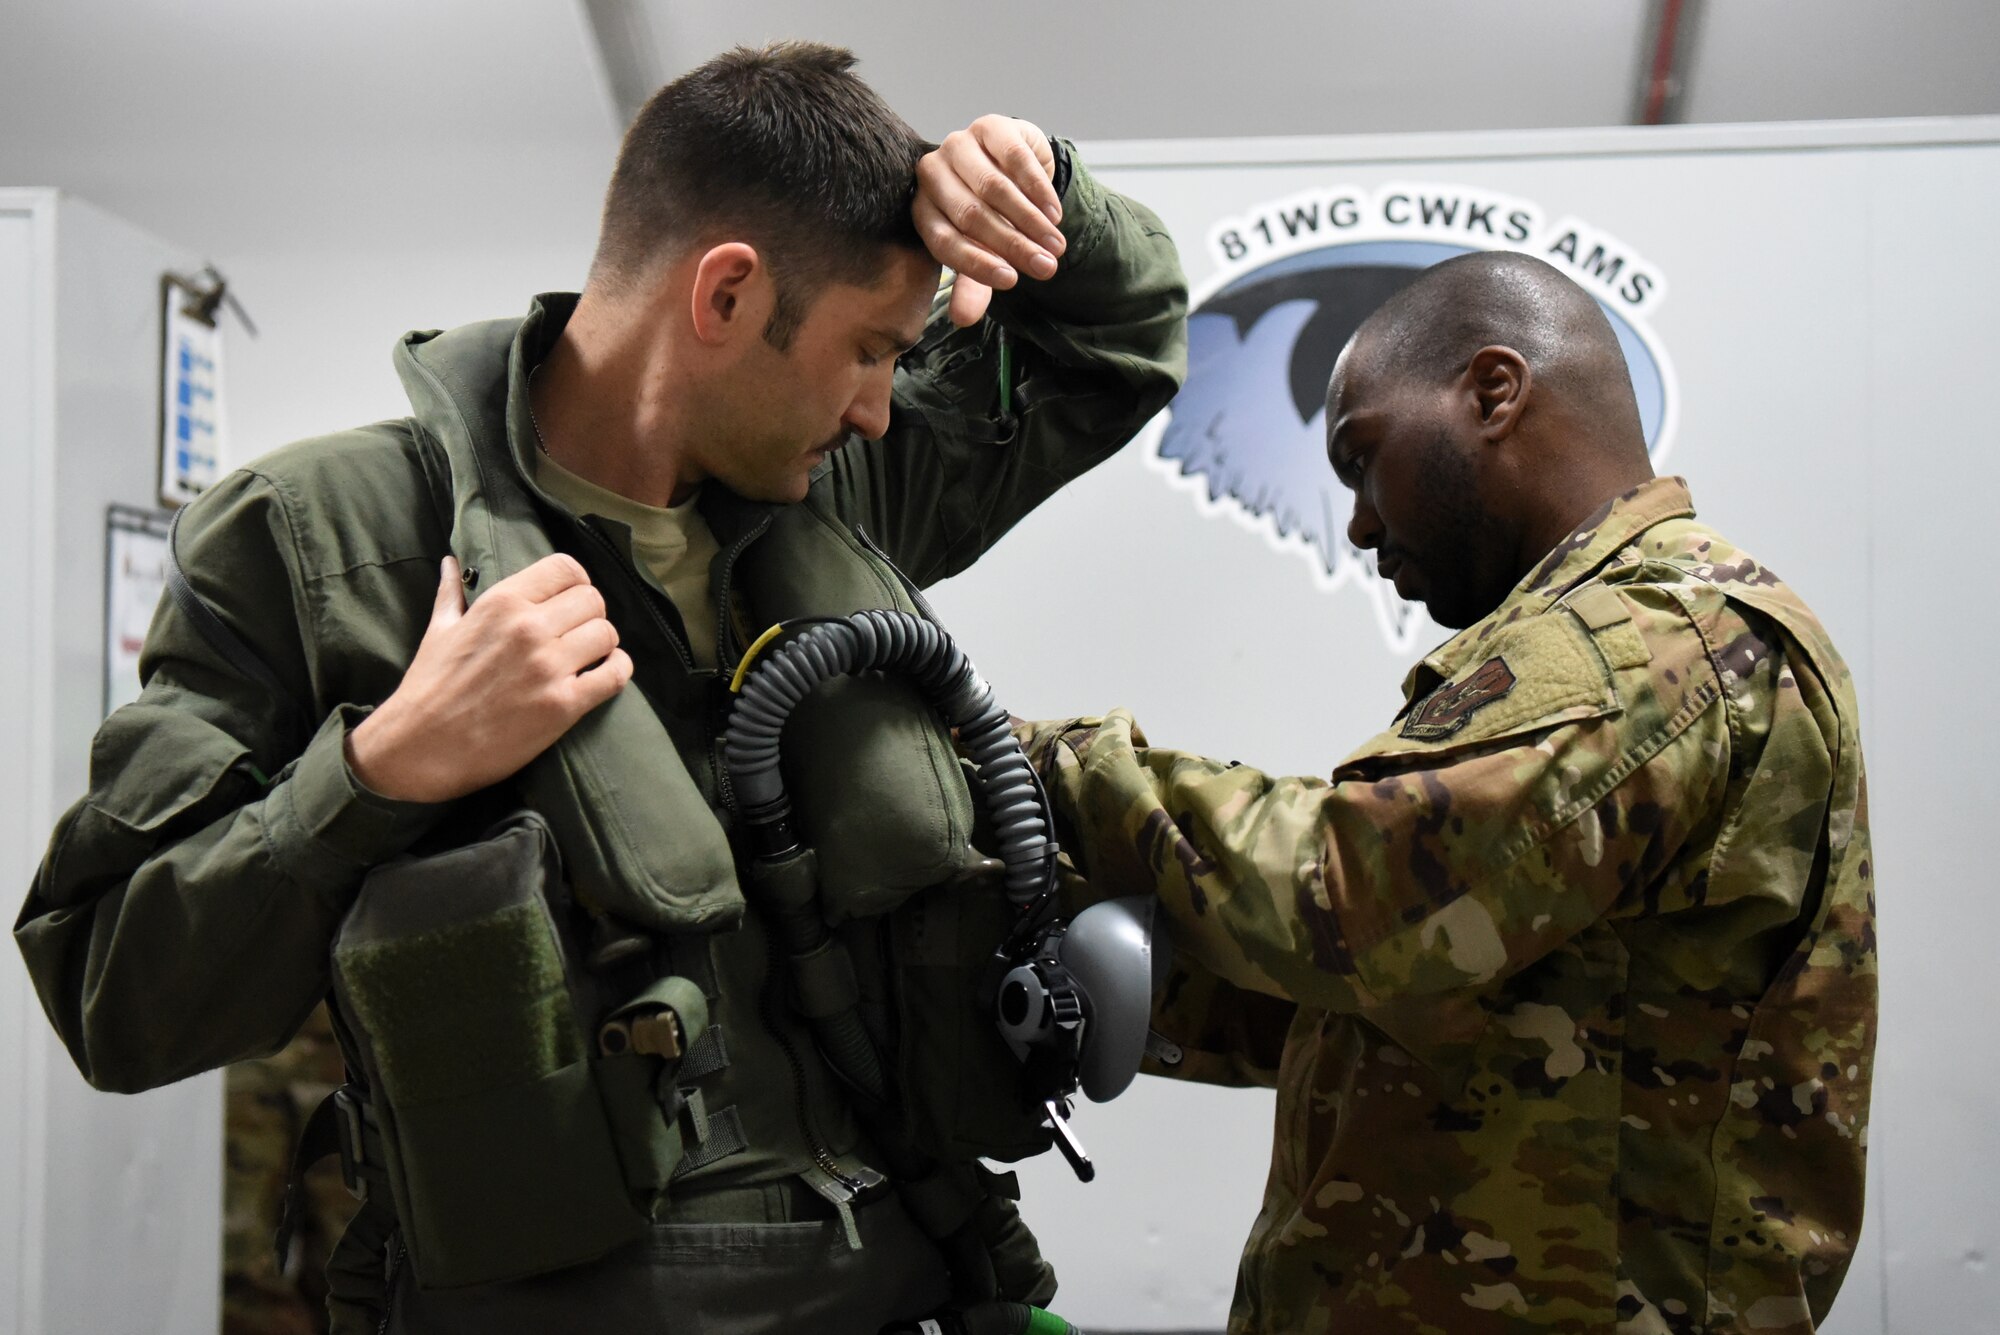 An F-35A Lightning II pilot assigned to the 4th Expeditionary Fighter Squadron receives assistance in securing gear to his sleeveless flight jacket in preparation for the first combat sortie in the U.S. Air Forces Central Command area of responsibility April 26, 2019, Al Dhafra Air Base, United Arab Emirates.